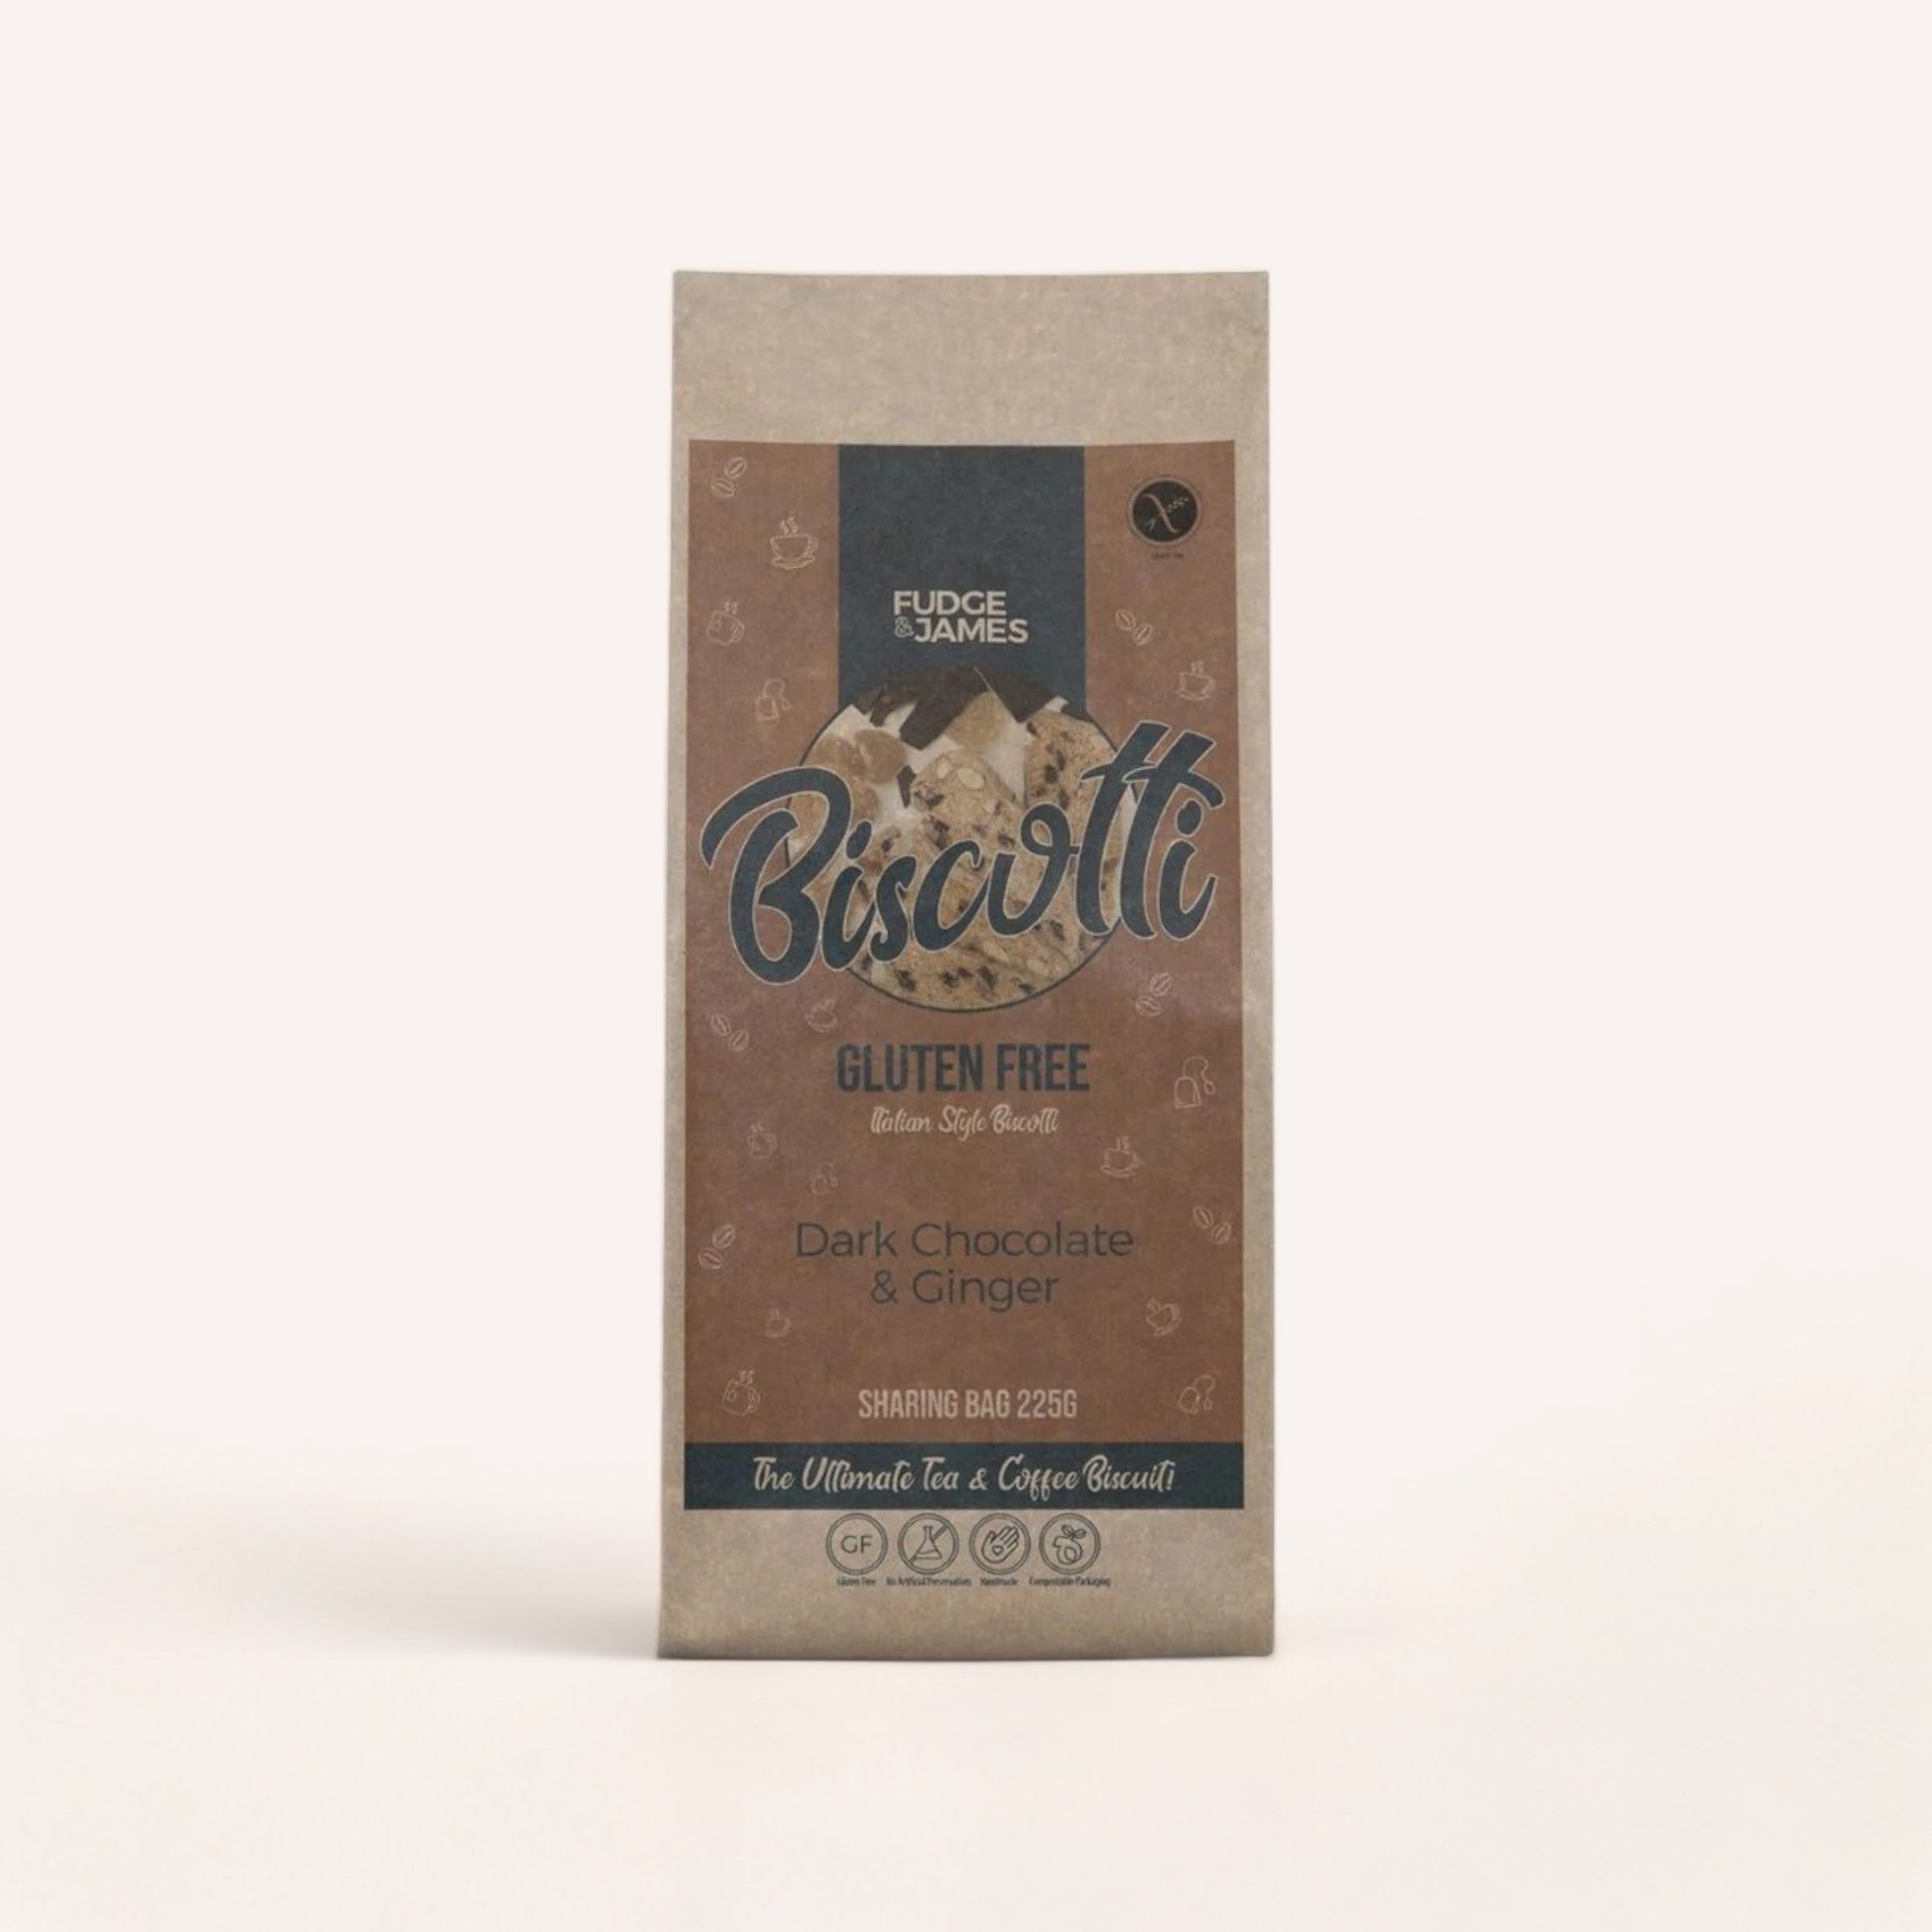 A package of Coffee, Anyone? biscotti fudge James, gluten-free with dark chocolate & ginger flavor, standing on a neutral background alongside an ACME Coffee Cup.